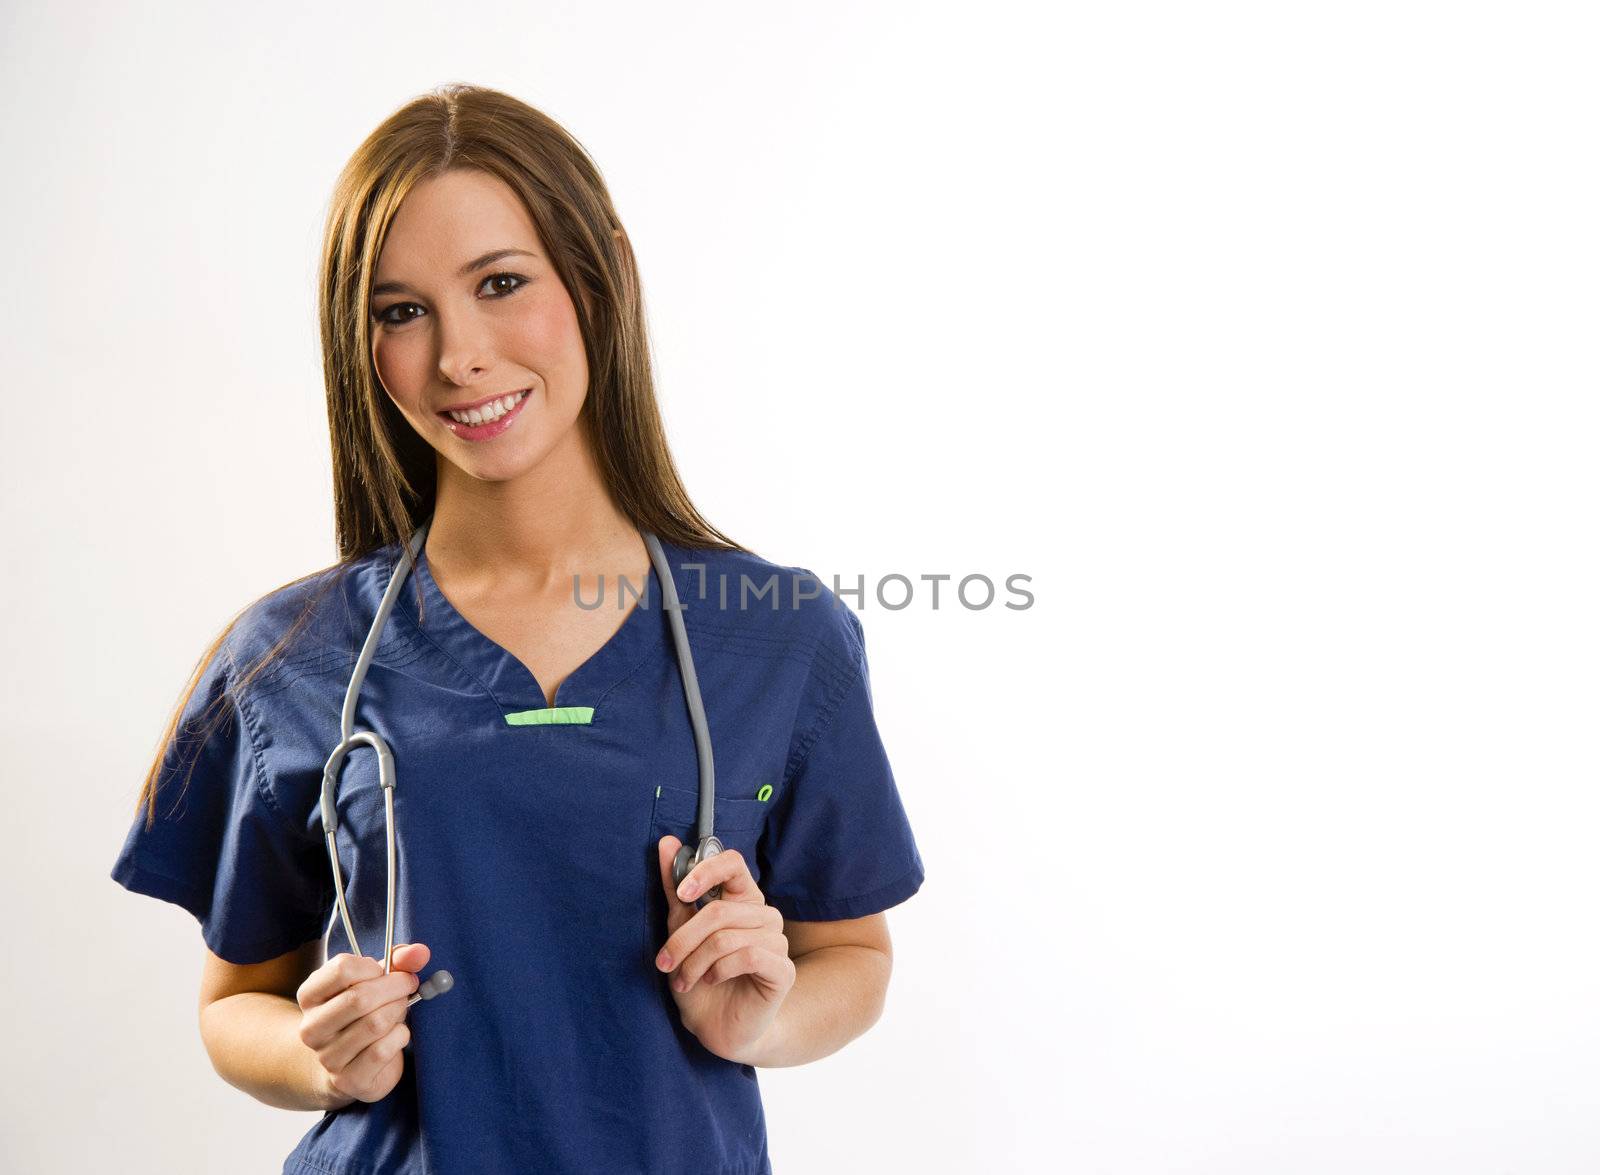 A beautiful health care worker looks up at the viewer from her work station